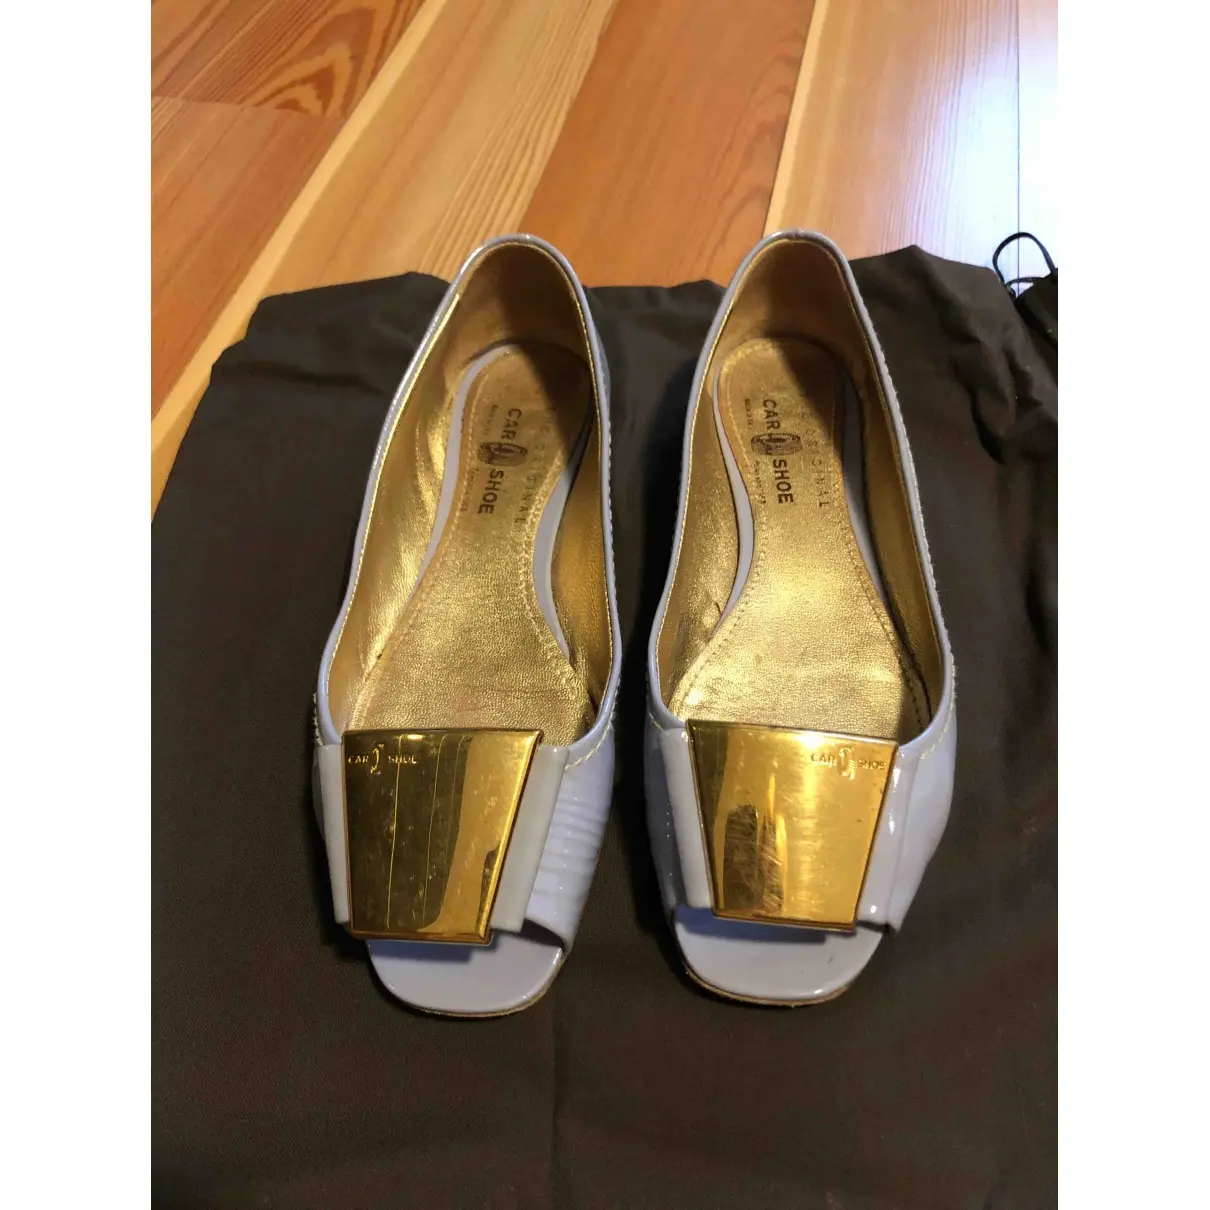 Carshoe Patent leather ballet flats for sale